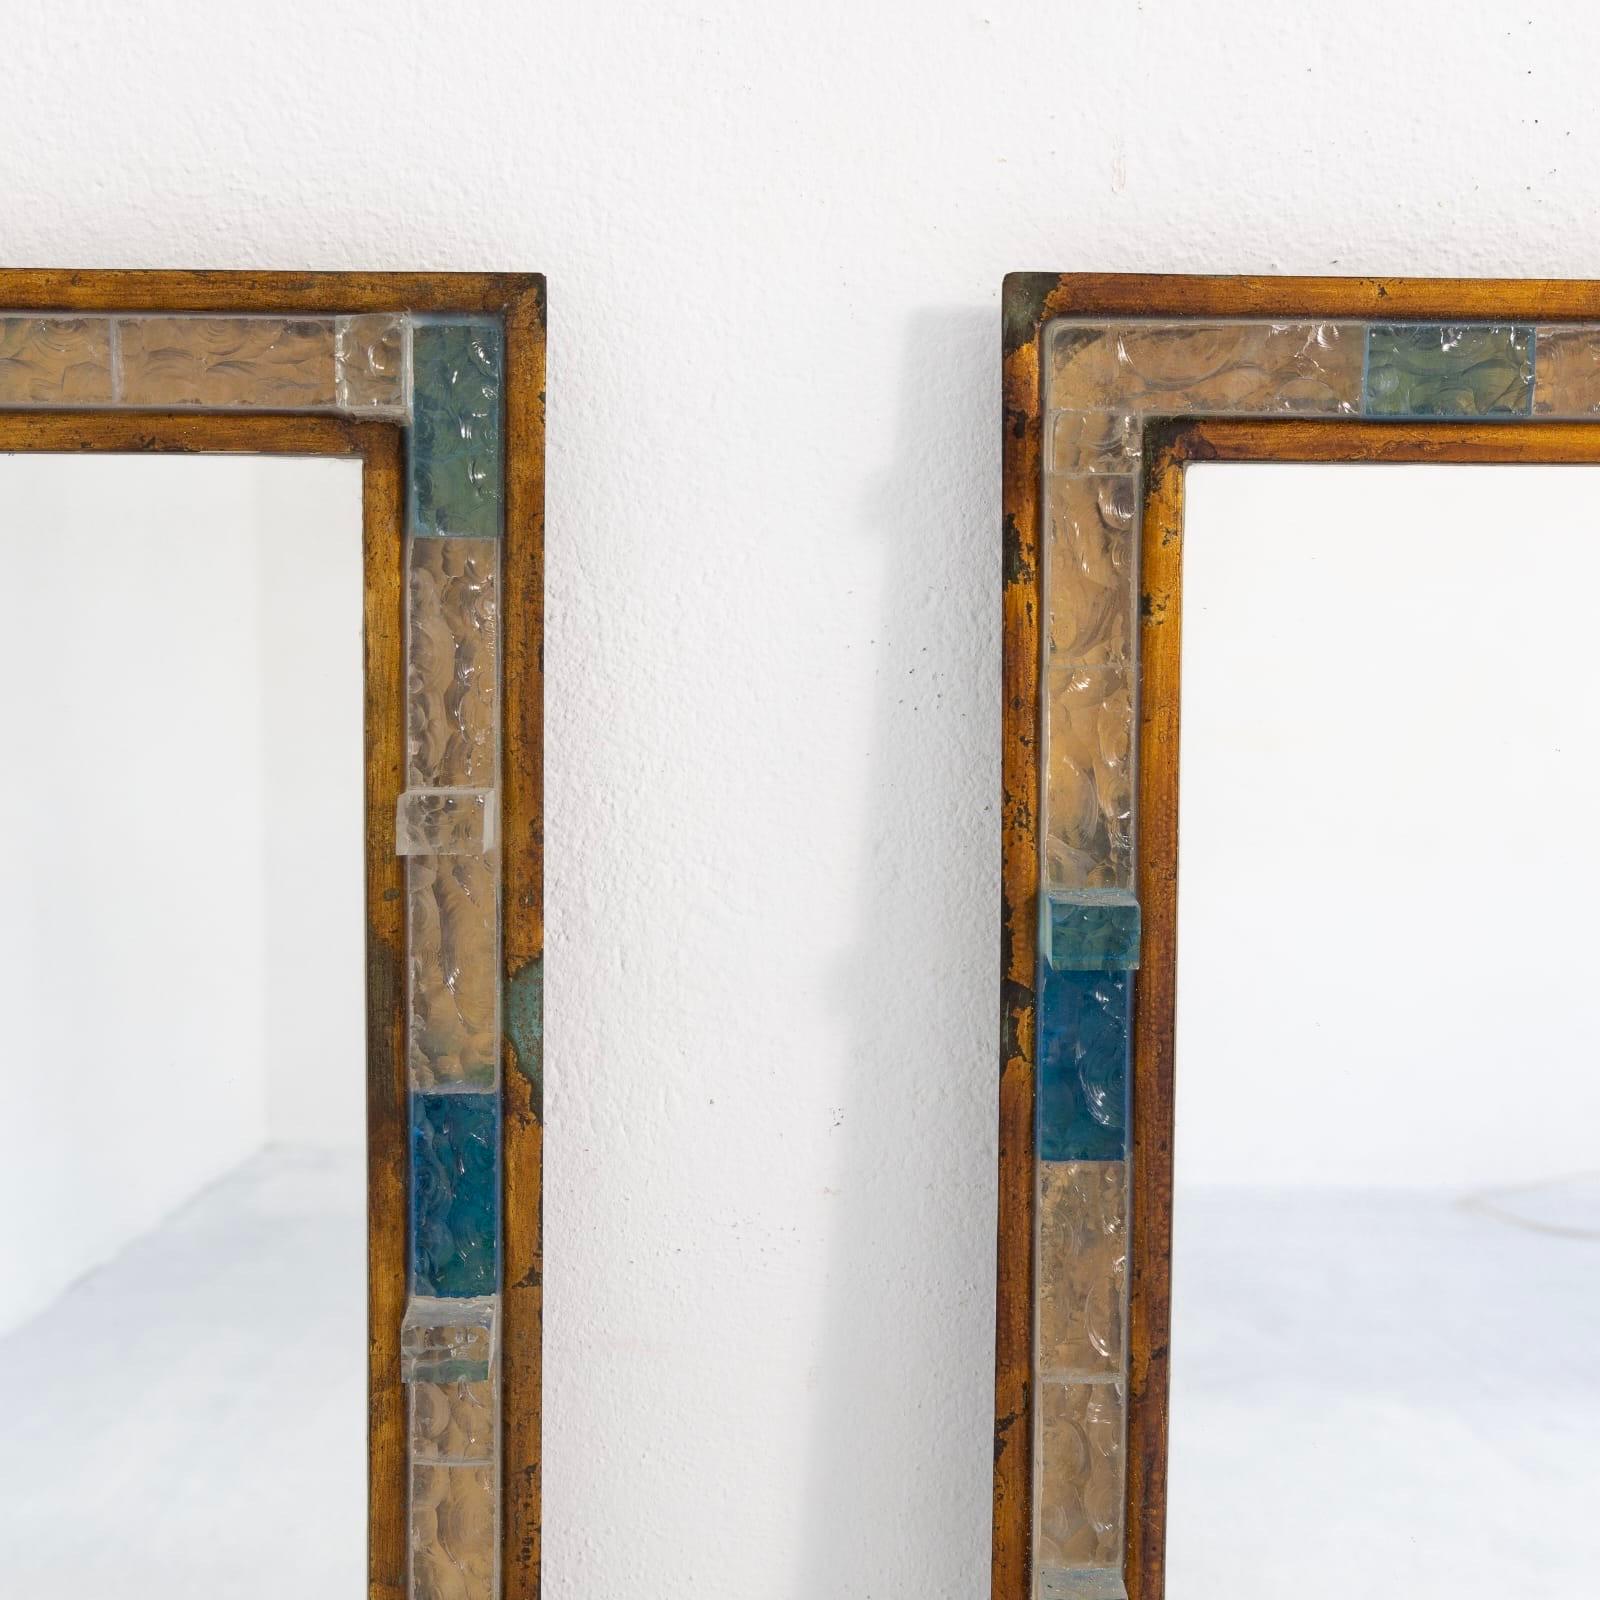 Very rare pair set of 2 large wall mirrors blue and clear hammered glass, gilt gold leaf wrought iron by the manufacture Poliarte in Verona in a Brutalist style, the most famous manufacture of Verona concurrent of Longobard and Biancardi during the